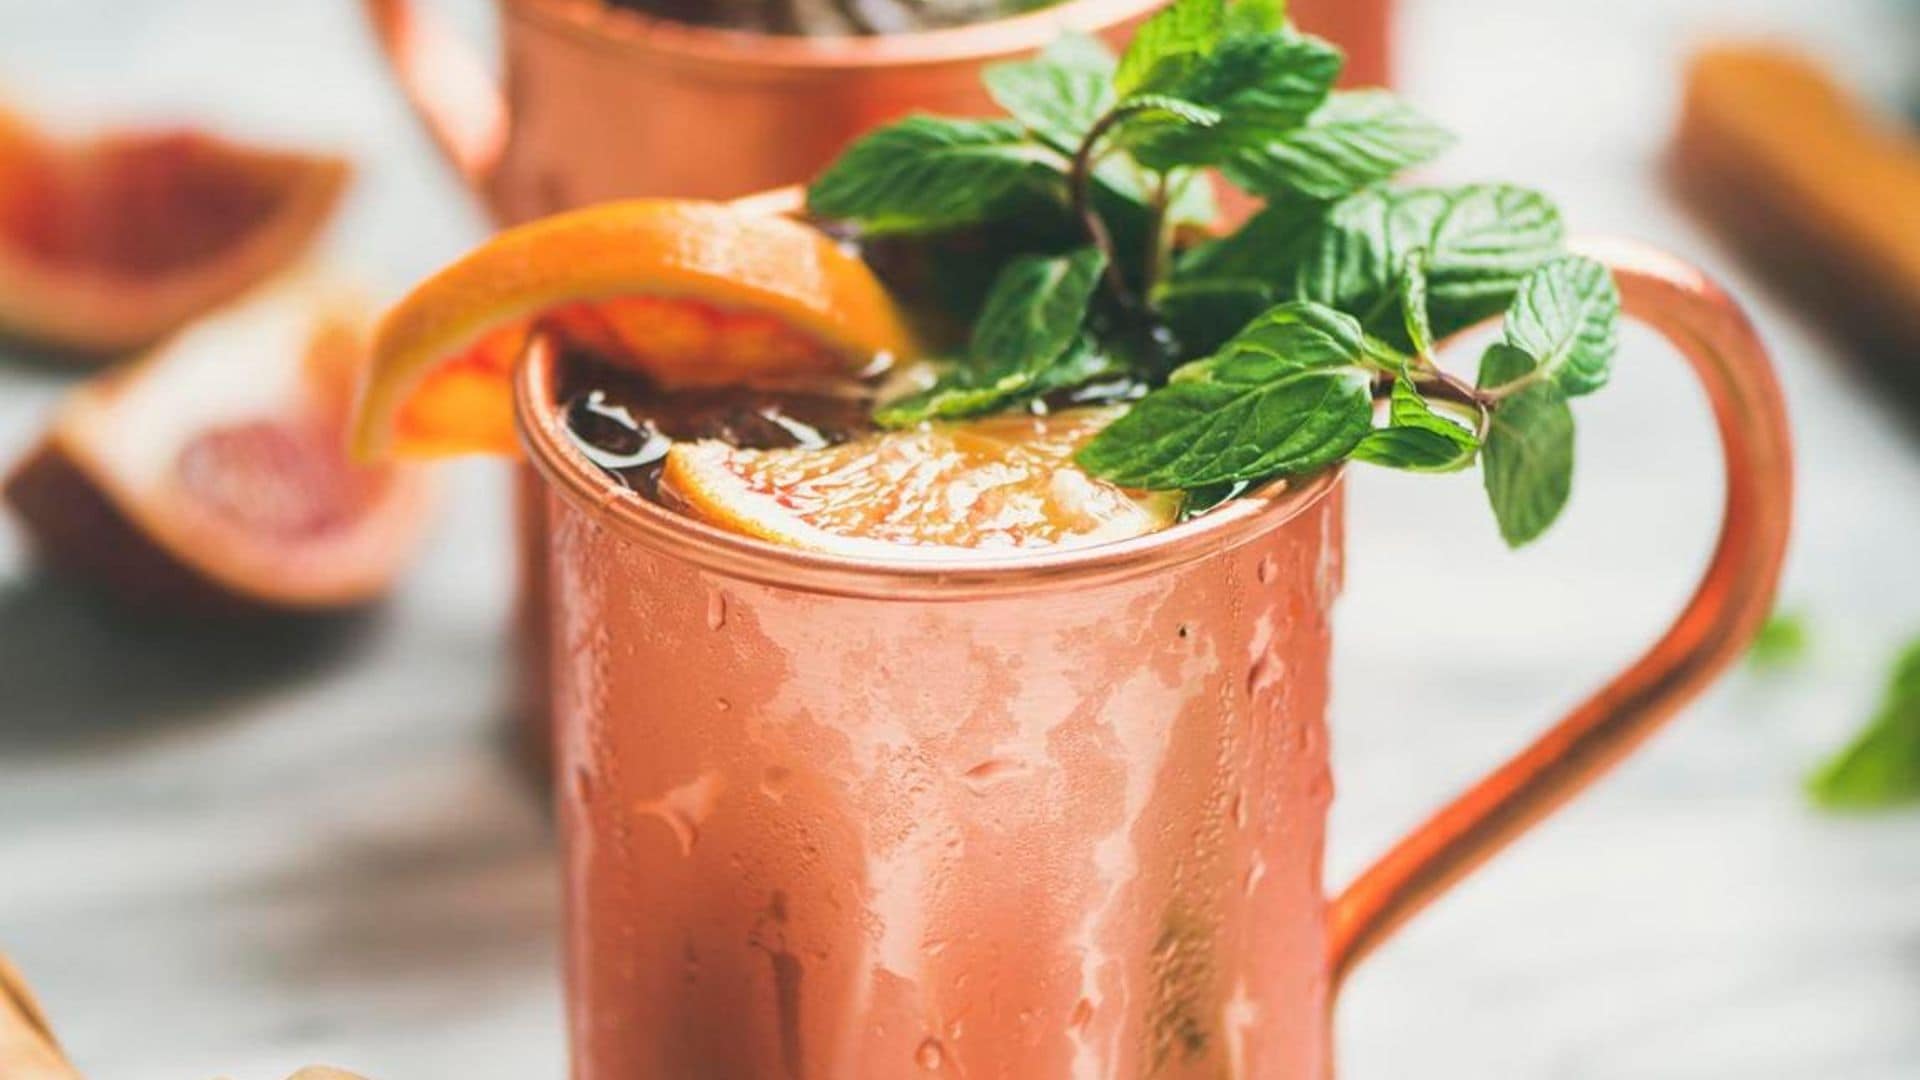 Blood orange Moscow mule alcohol cocktails with fresh mint leaves and ice in copper mugs over white marble background